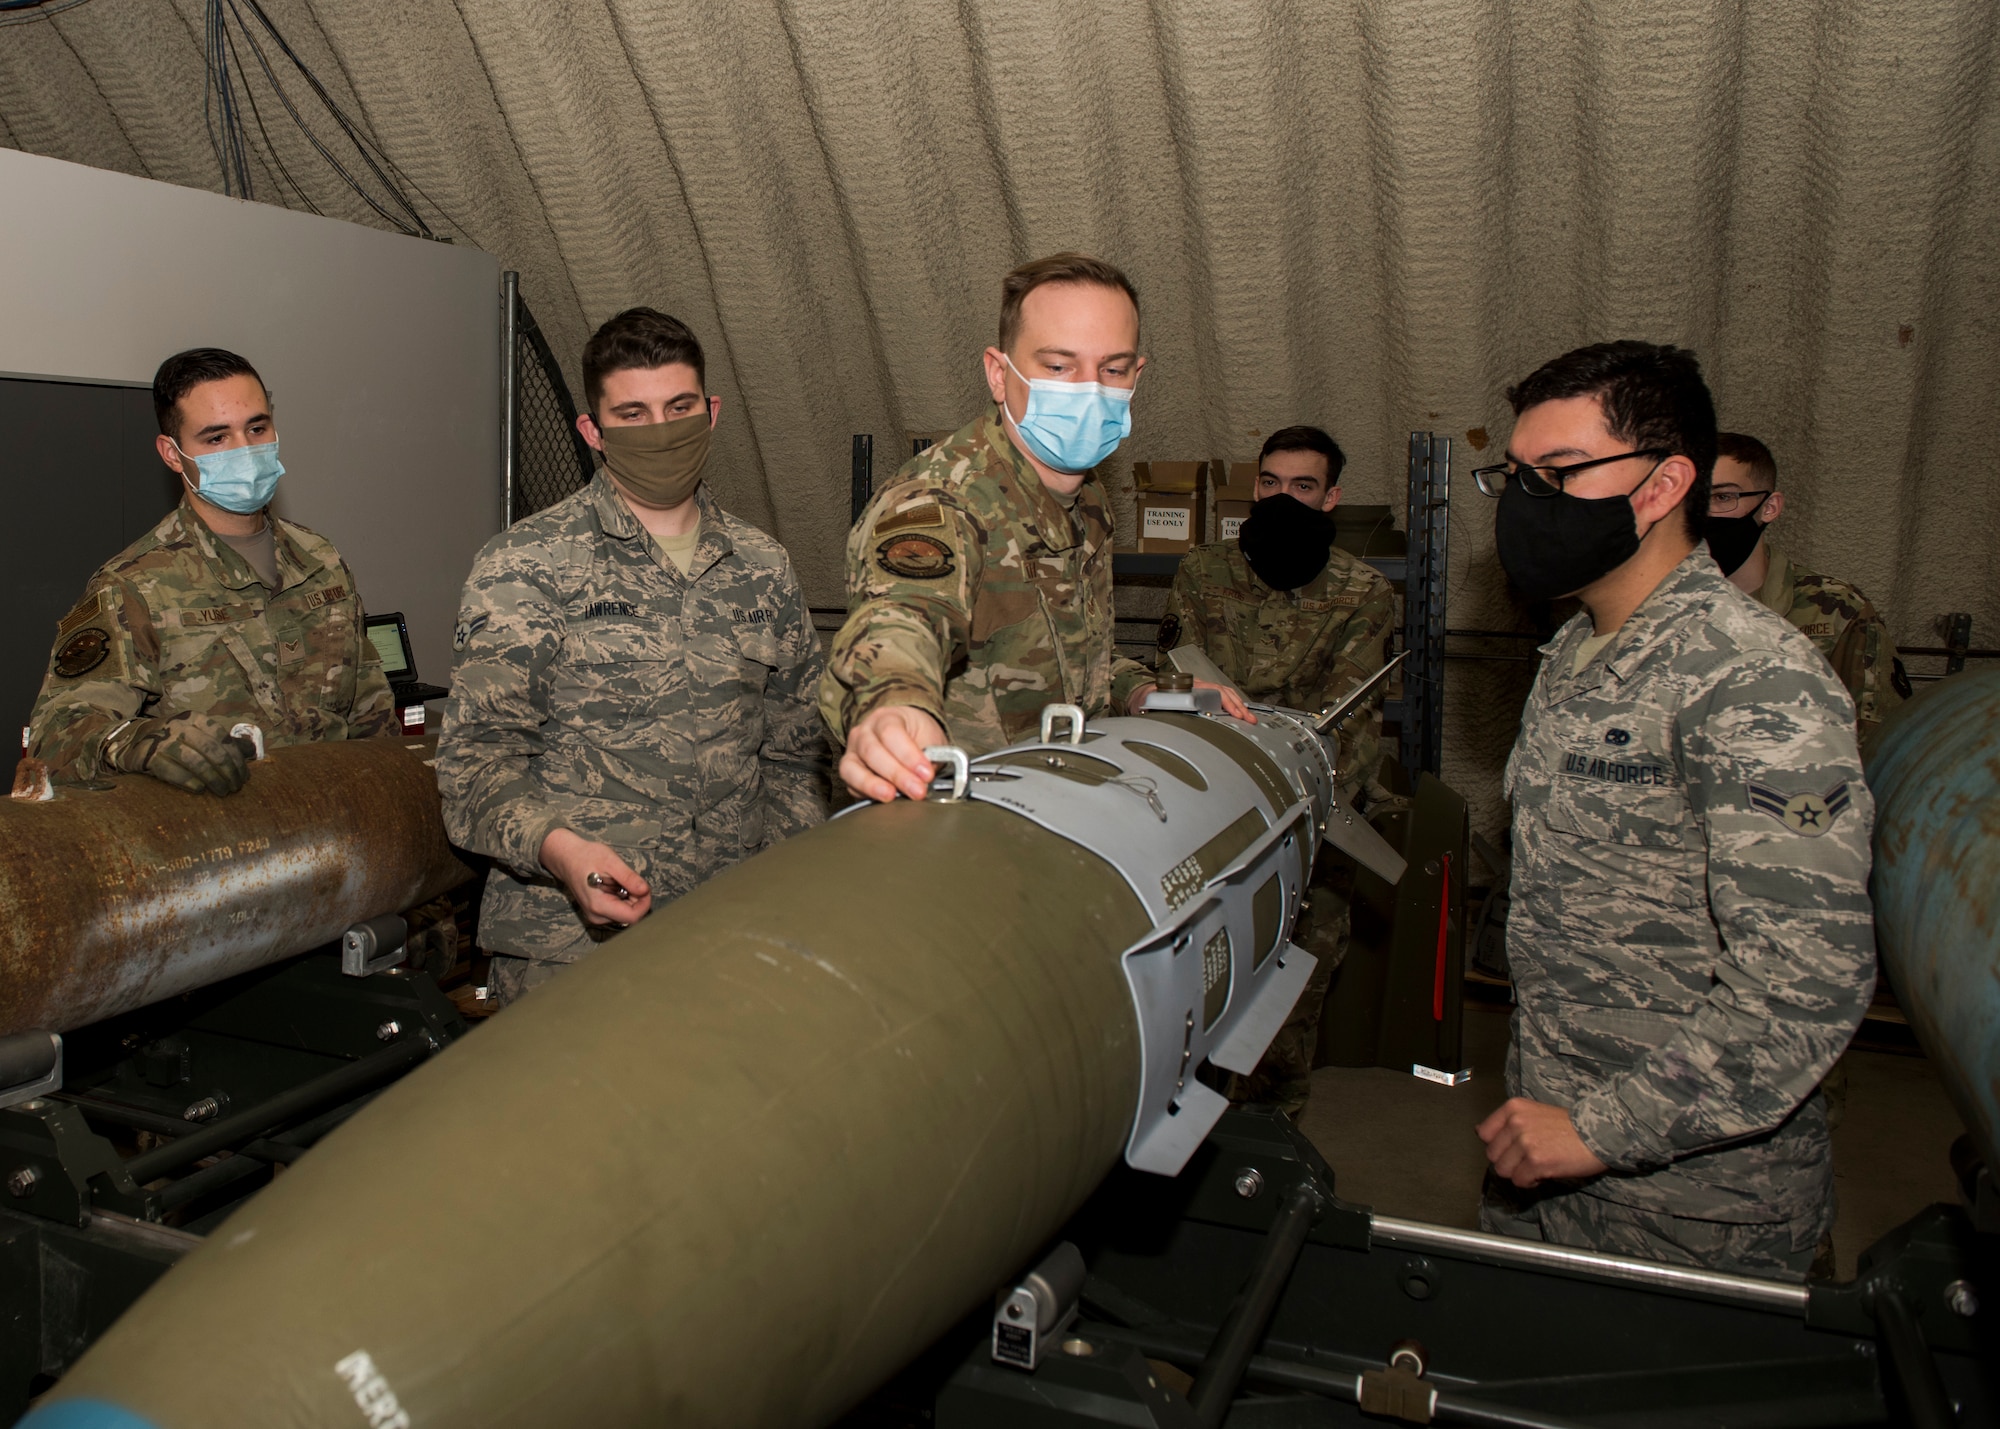 U.S. Air Force Staff Sgt. Jacob Smith, third from left, the 3rd Munitions Squadron training supervisor, teaches a combat munitions training class at Joint Base Elmendorf-Richardson, Alaska, Nov. 5, 2020. U.S. Air Force Tech. Sgt. Nicholas Kern, the 3rd MUNS training section chief, revamped his squadron’s training section and implemented an expanded CMT program that familiarizes ammo troops with a variety of munitions in one location.